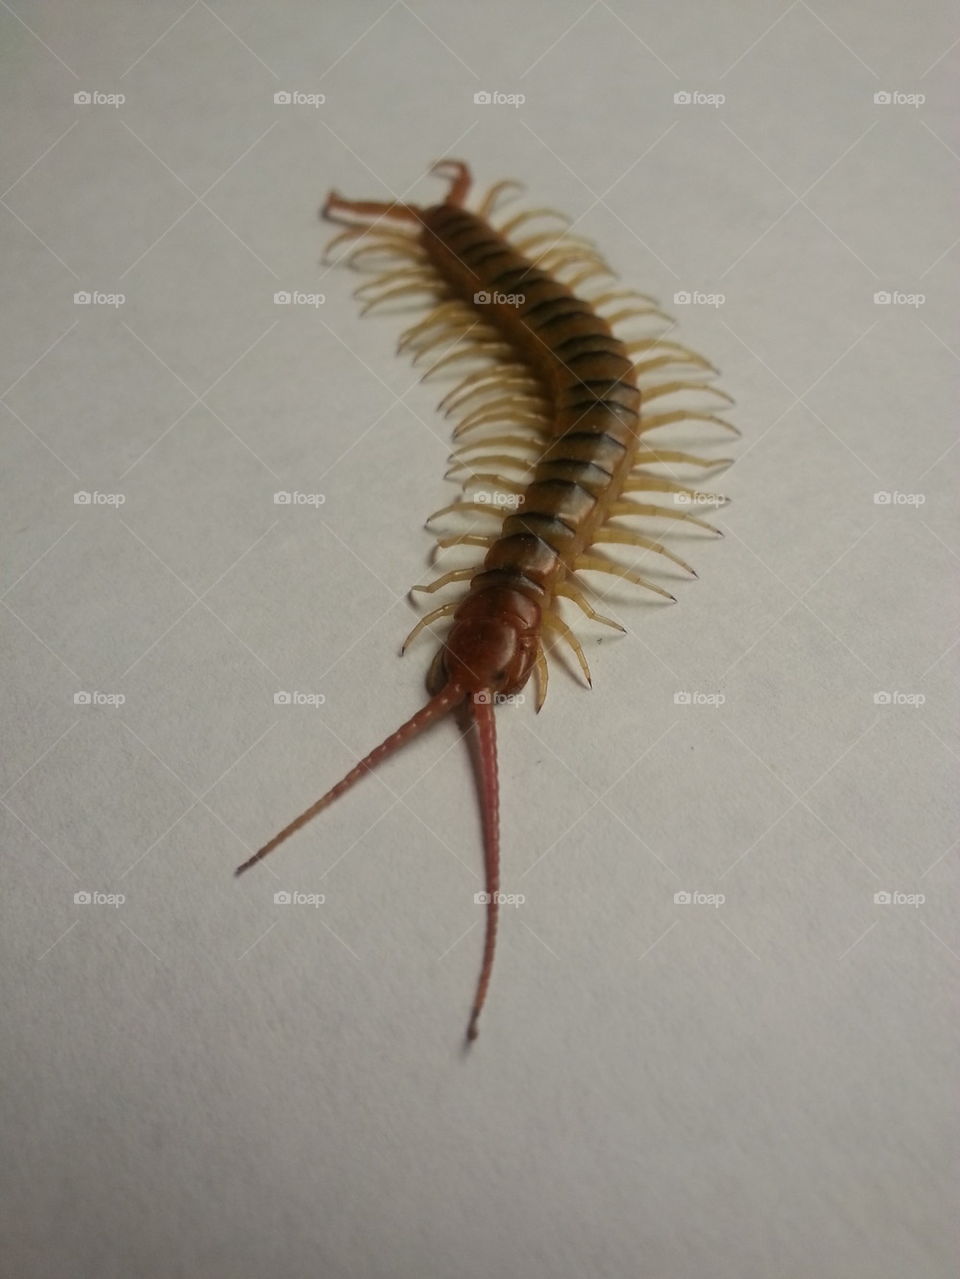 Look at this centipede